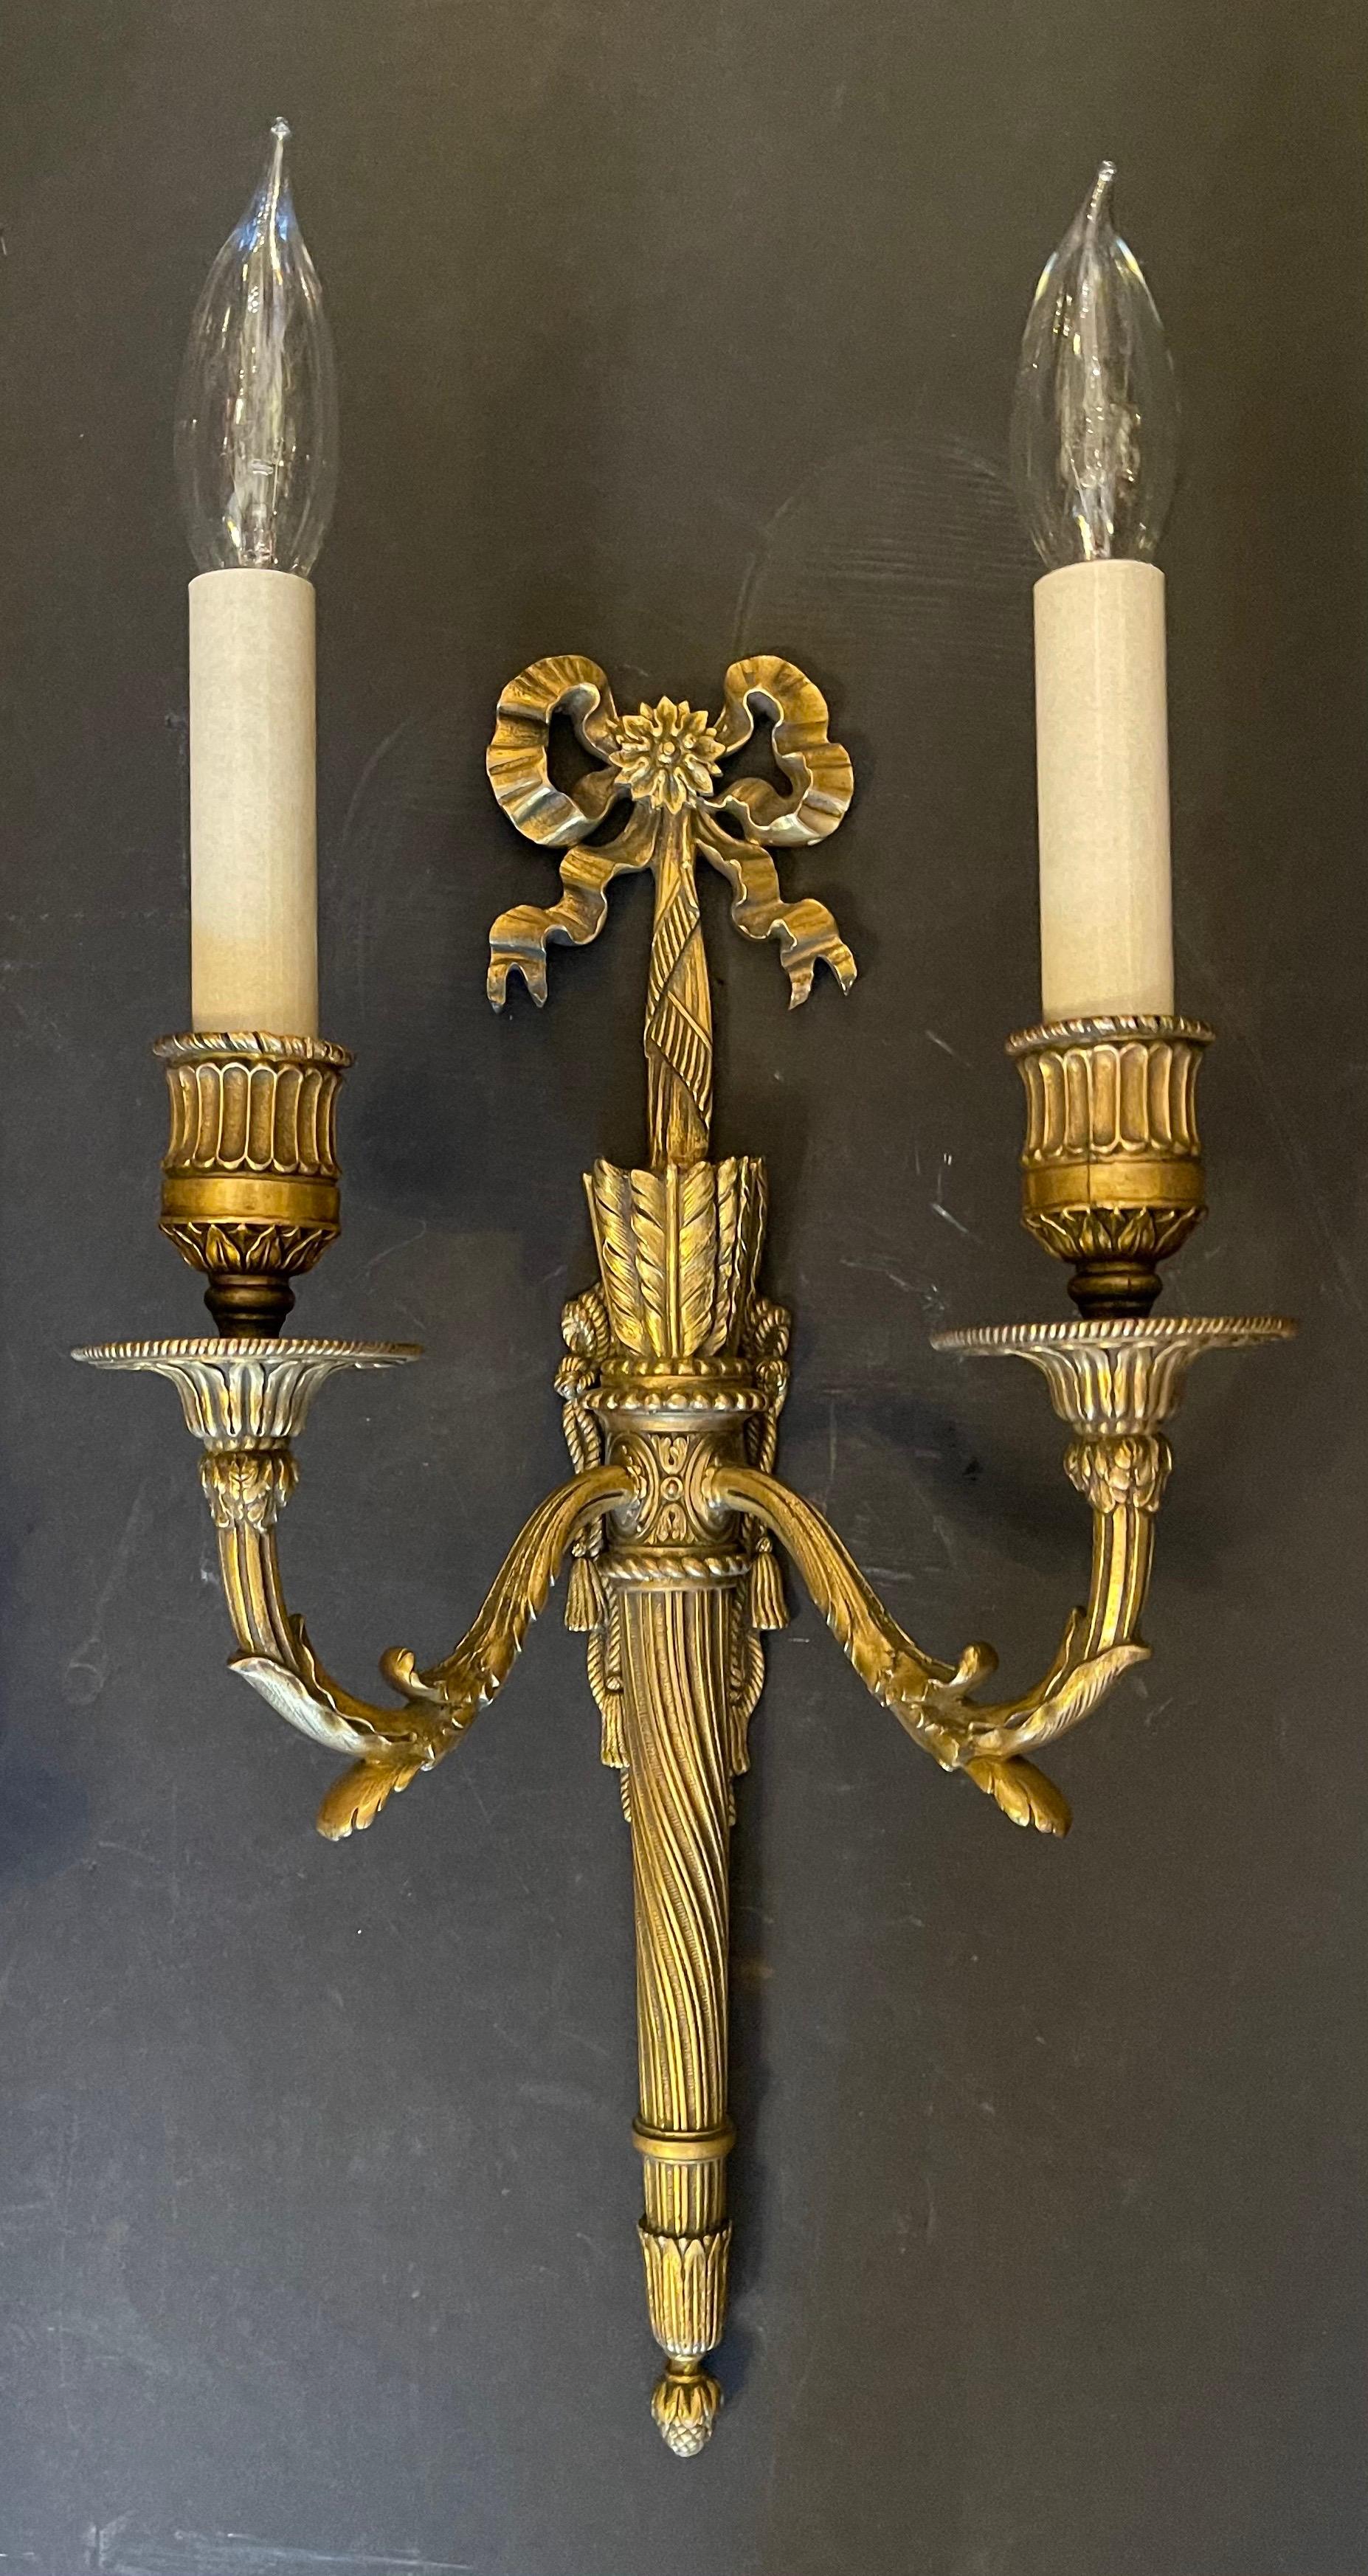 A wonderful pair of French gilt doré bronze bow torchiere two-light sconces in the manner of Caldwell.